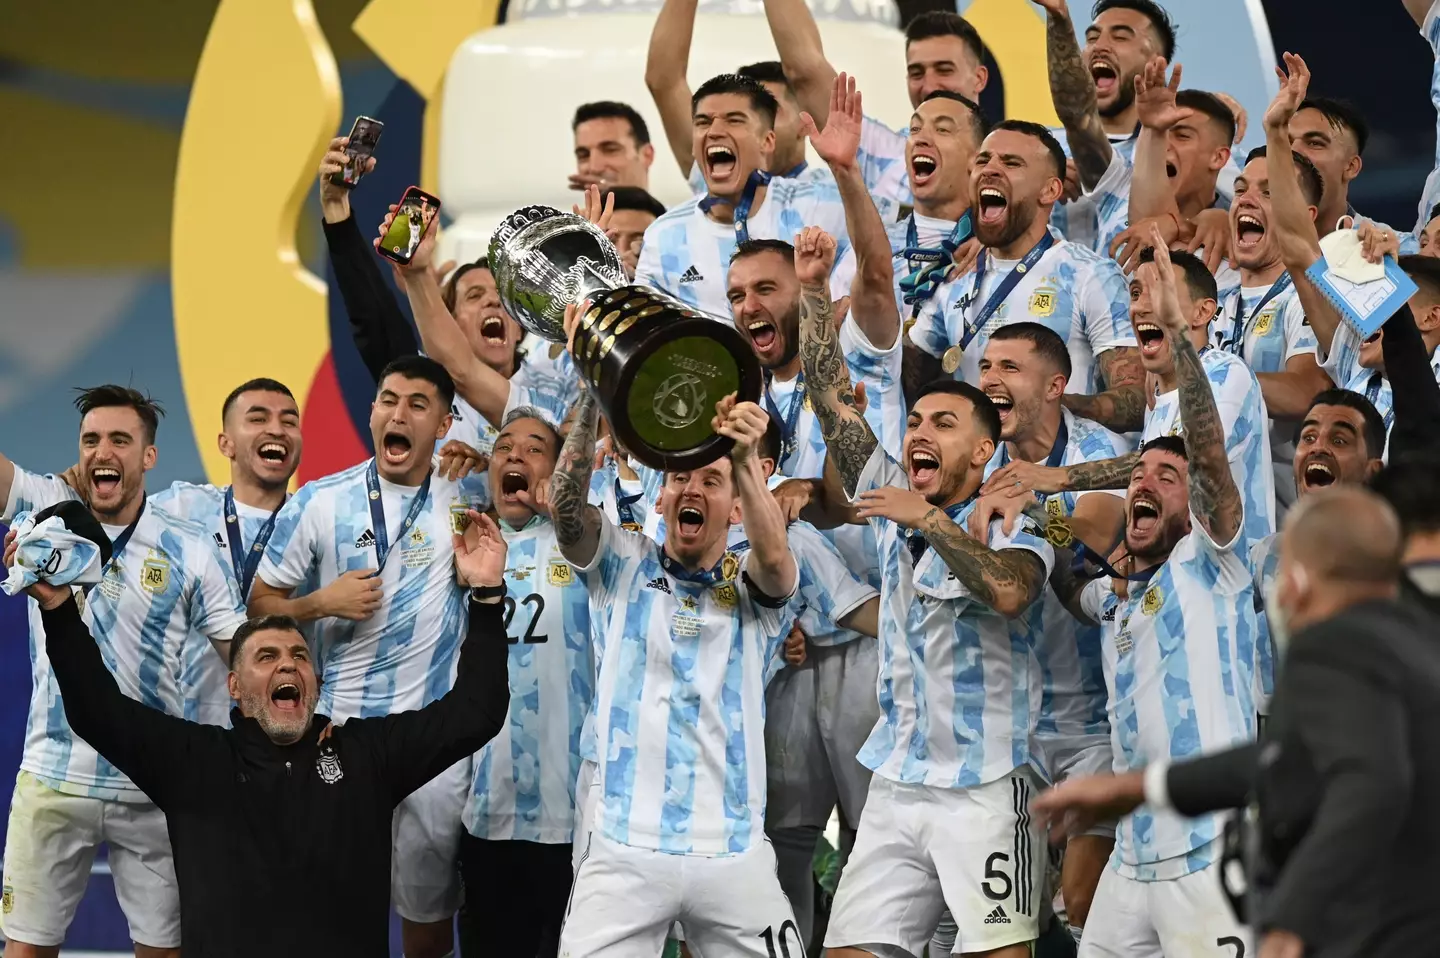 Argentina captain Lionel Messi lifted the 2021 Copa America trophy after leading his side to a 1-0 win over Brazil in the final.